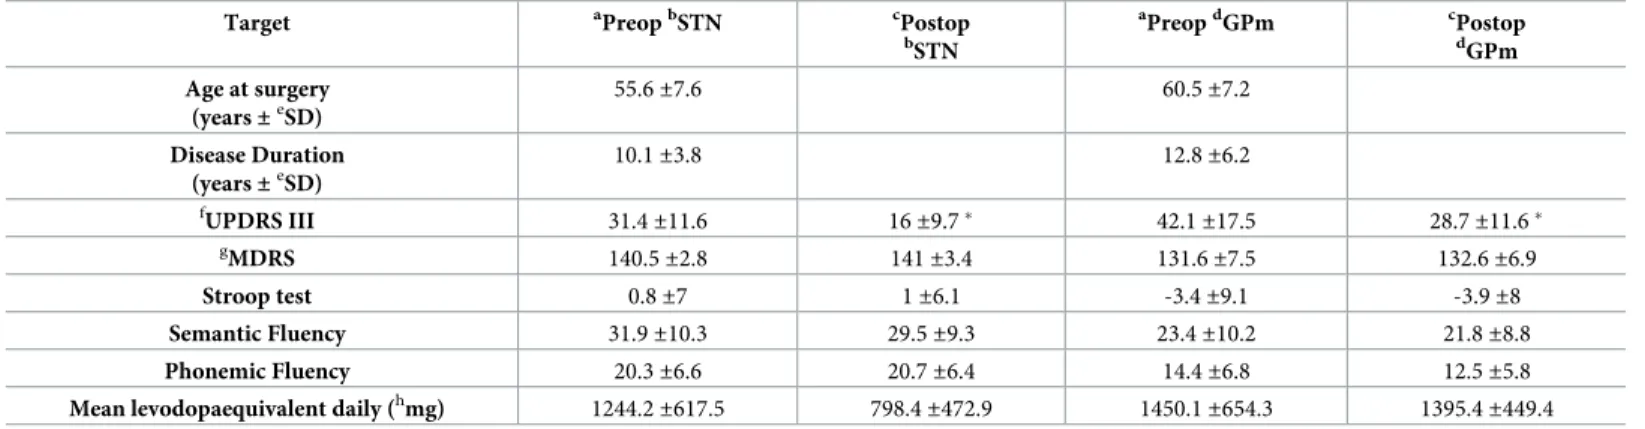 Table 1. Clinical data concerning 29 patients with GPm DBS and 42 patients with STN DBS.